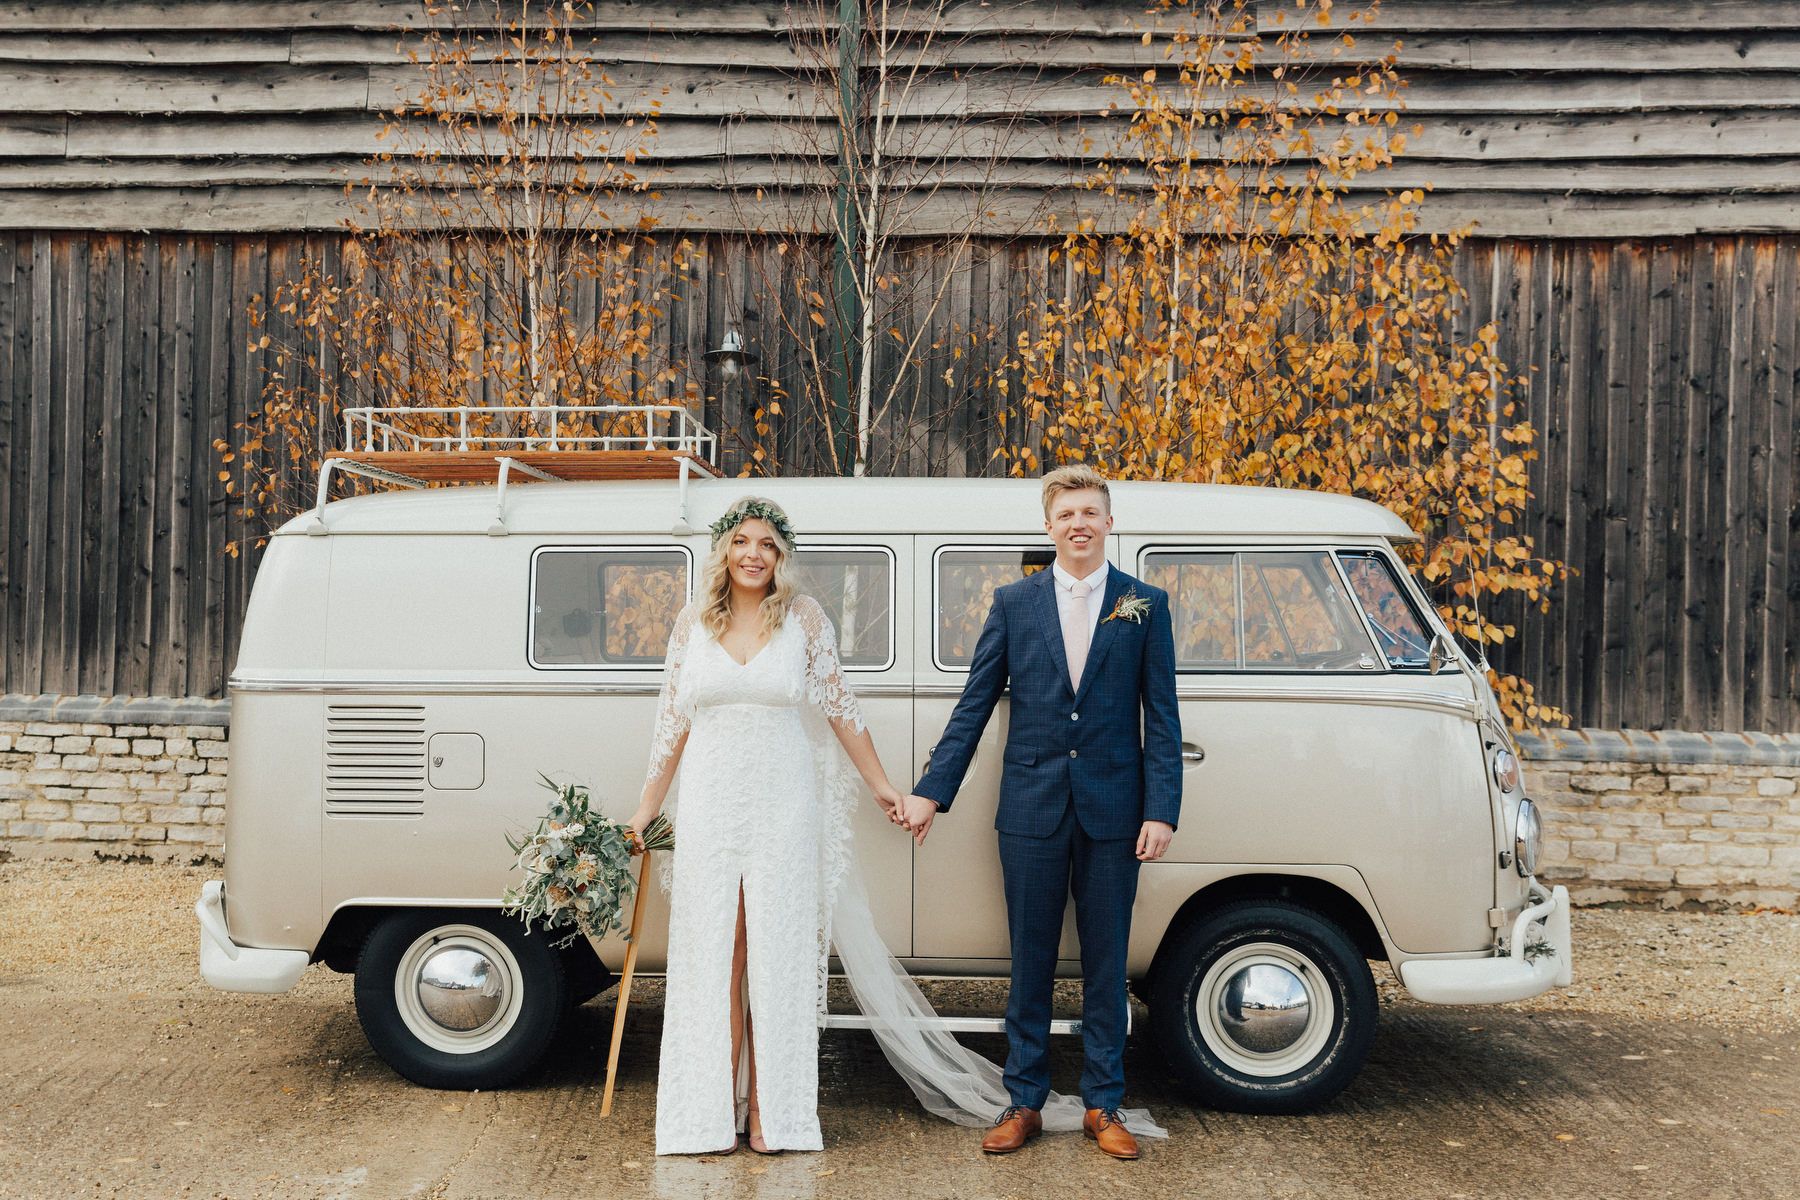 This couple went for a laid back boho fall wedding with lots of greenery and pumpkins